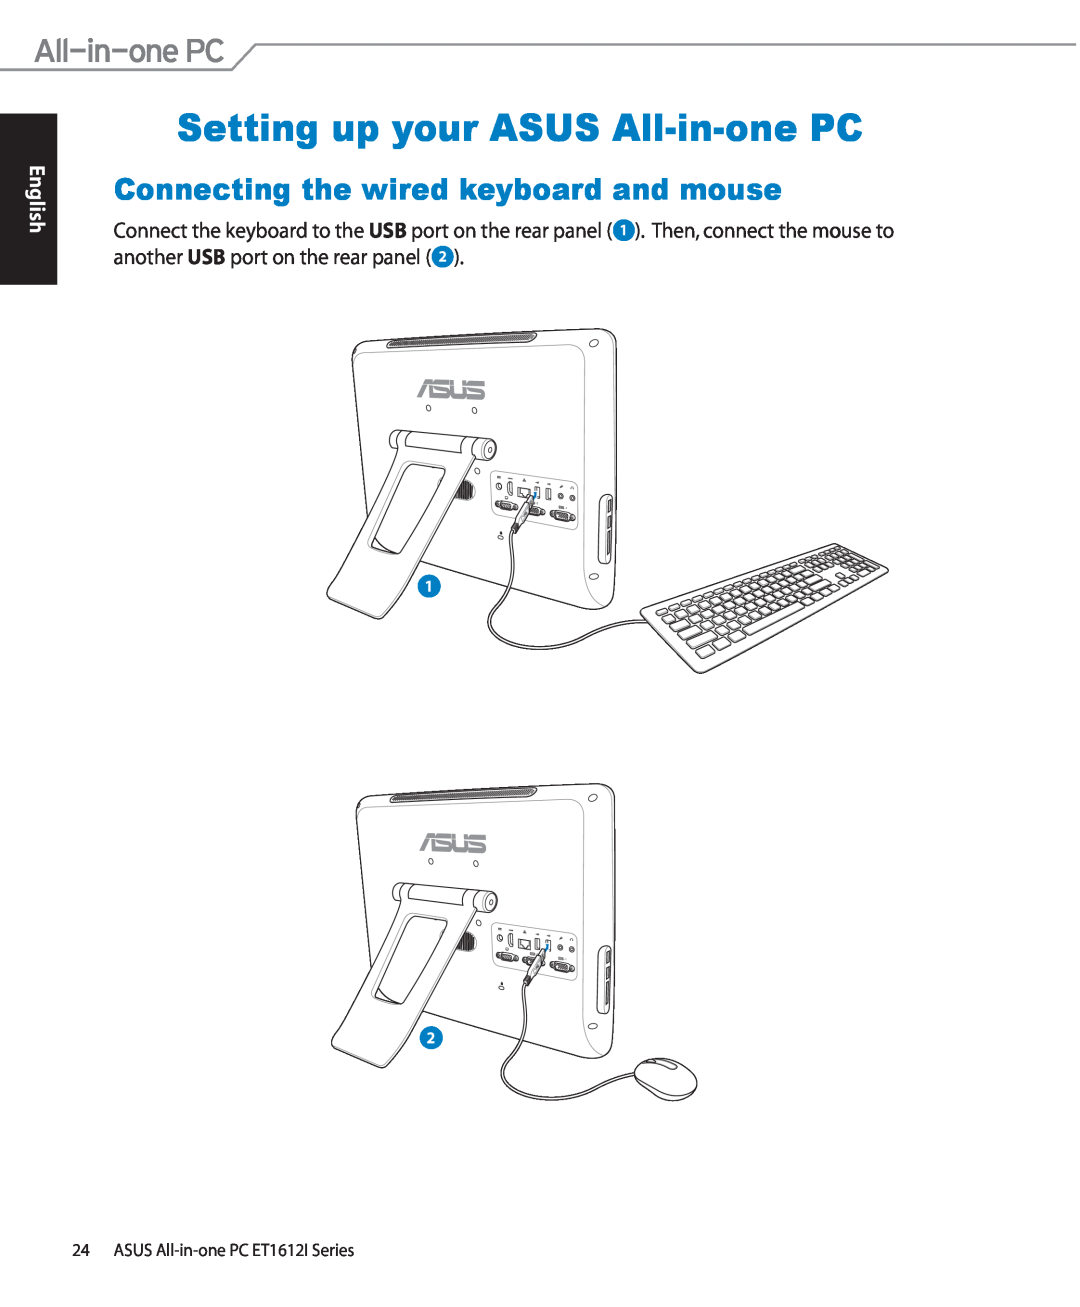 Asus ET1612IUTSB007C, ET1612IUTSB004E Setting up your ASUS All-in-one PC, Connecting the wired keyboard and mouse, English 